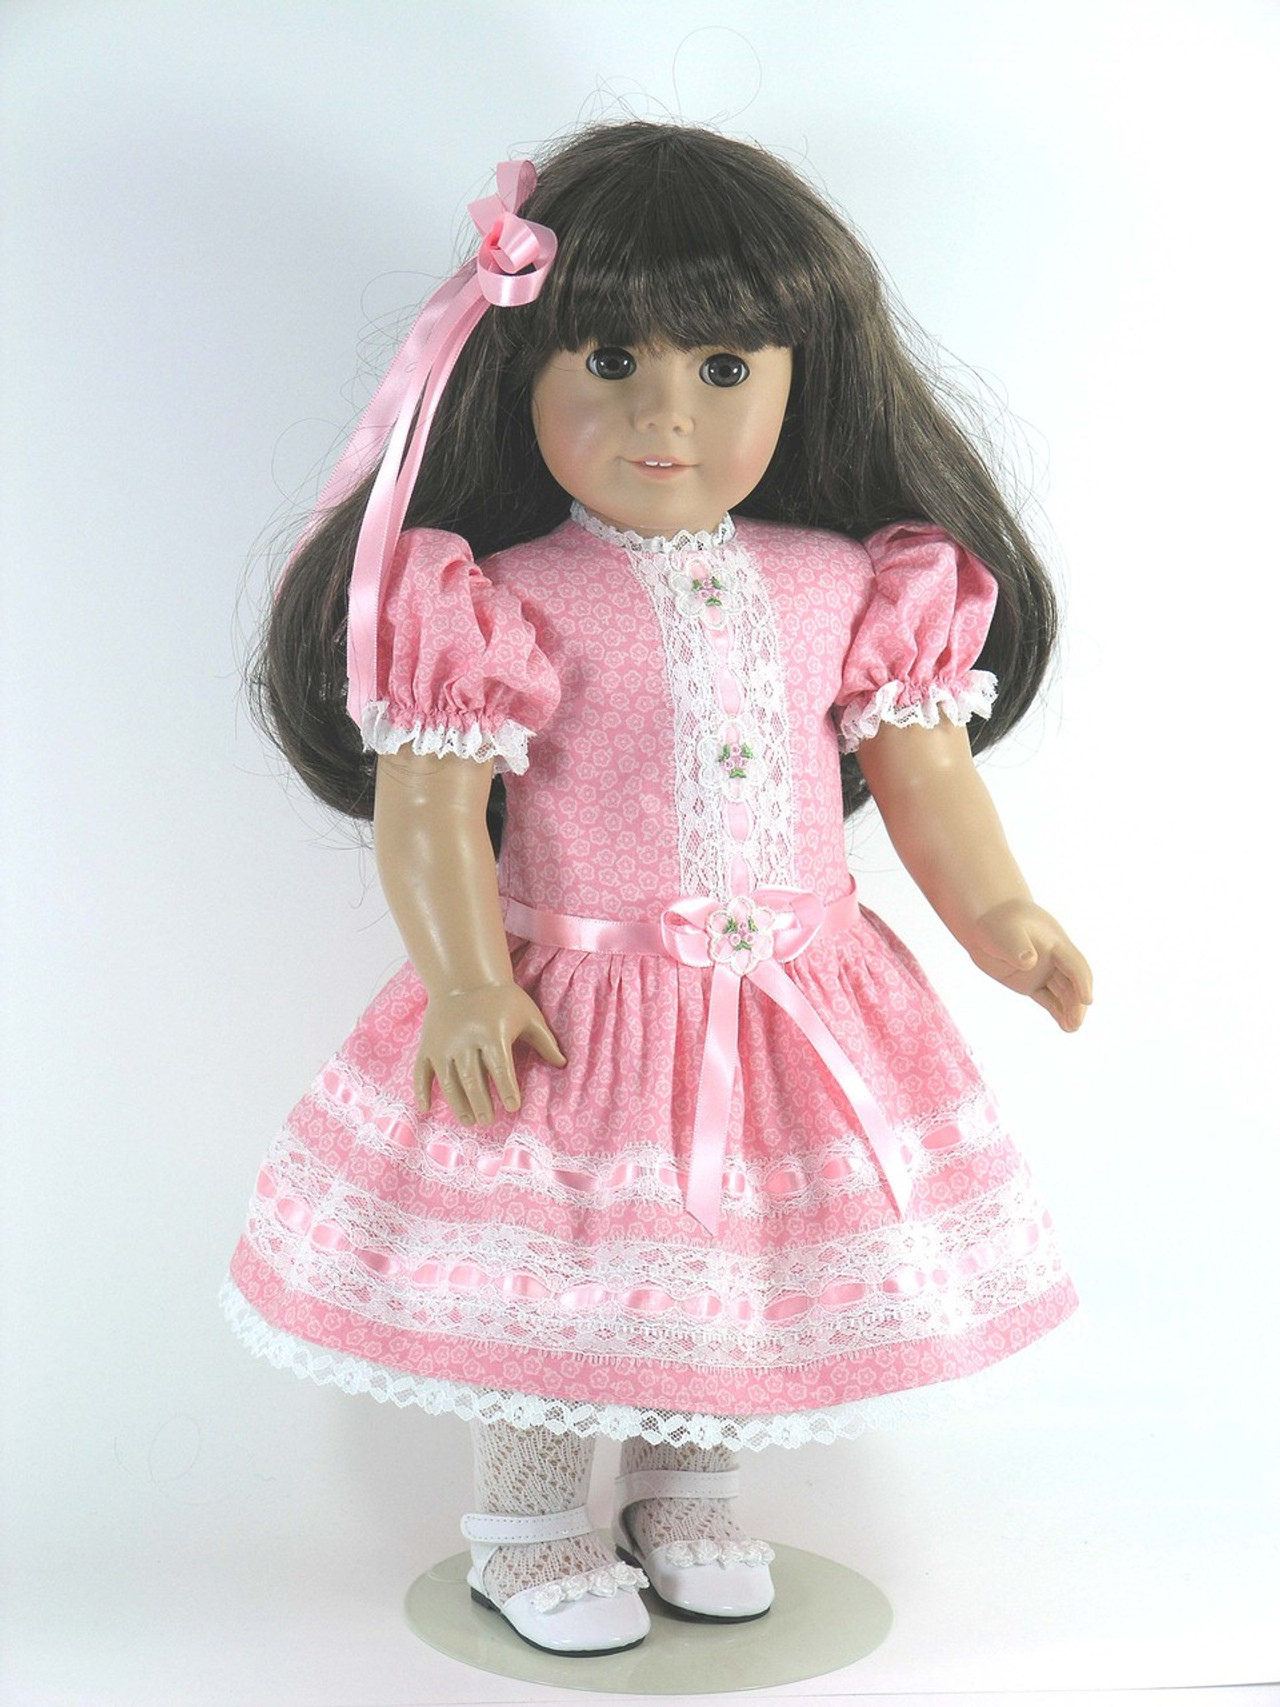 Clothes for Samantha, Rebecca - Exclusively Linda Doll Clothes